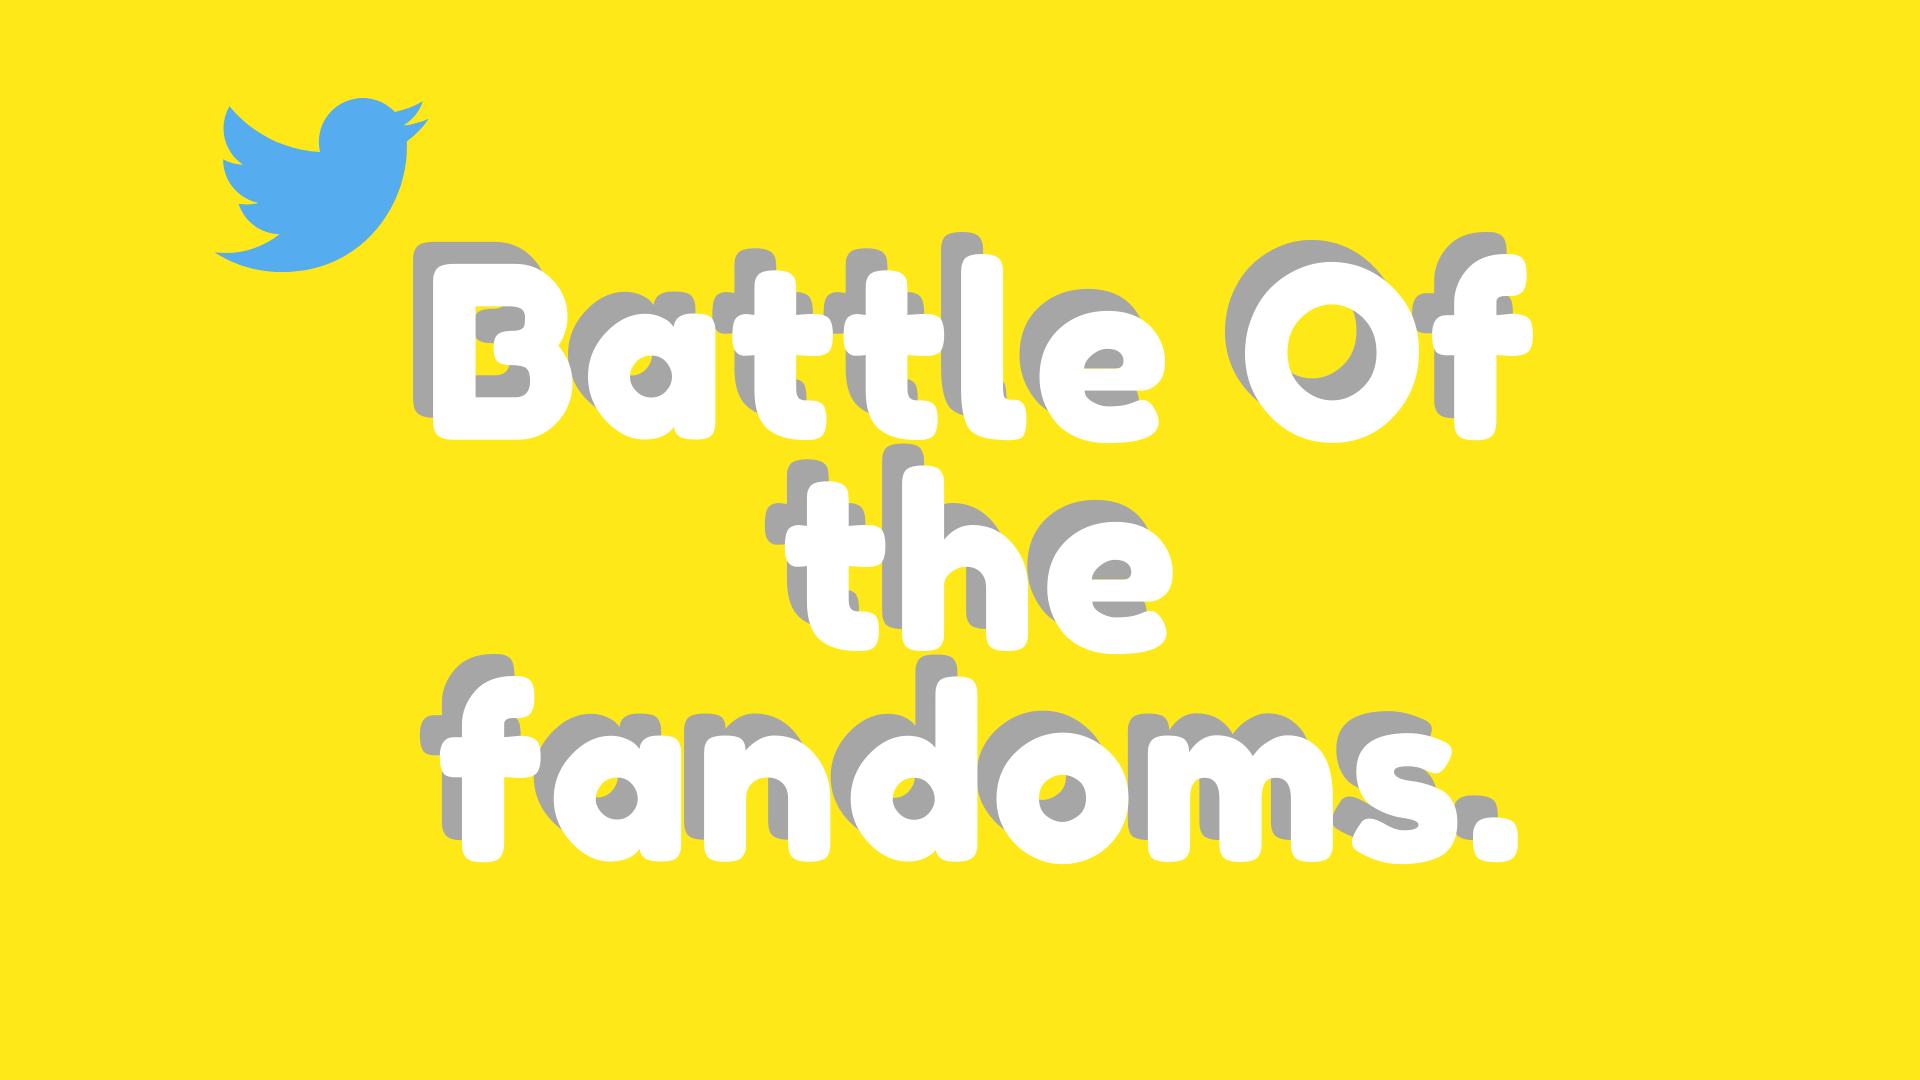 Battle of the fandoms writing in white with a grey shadow on a yellow background